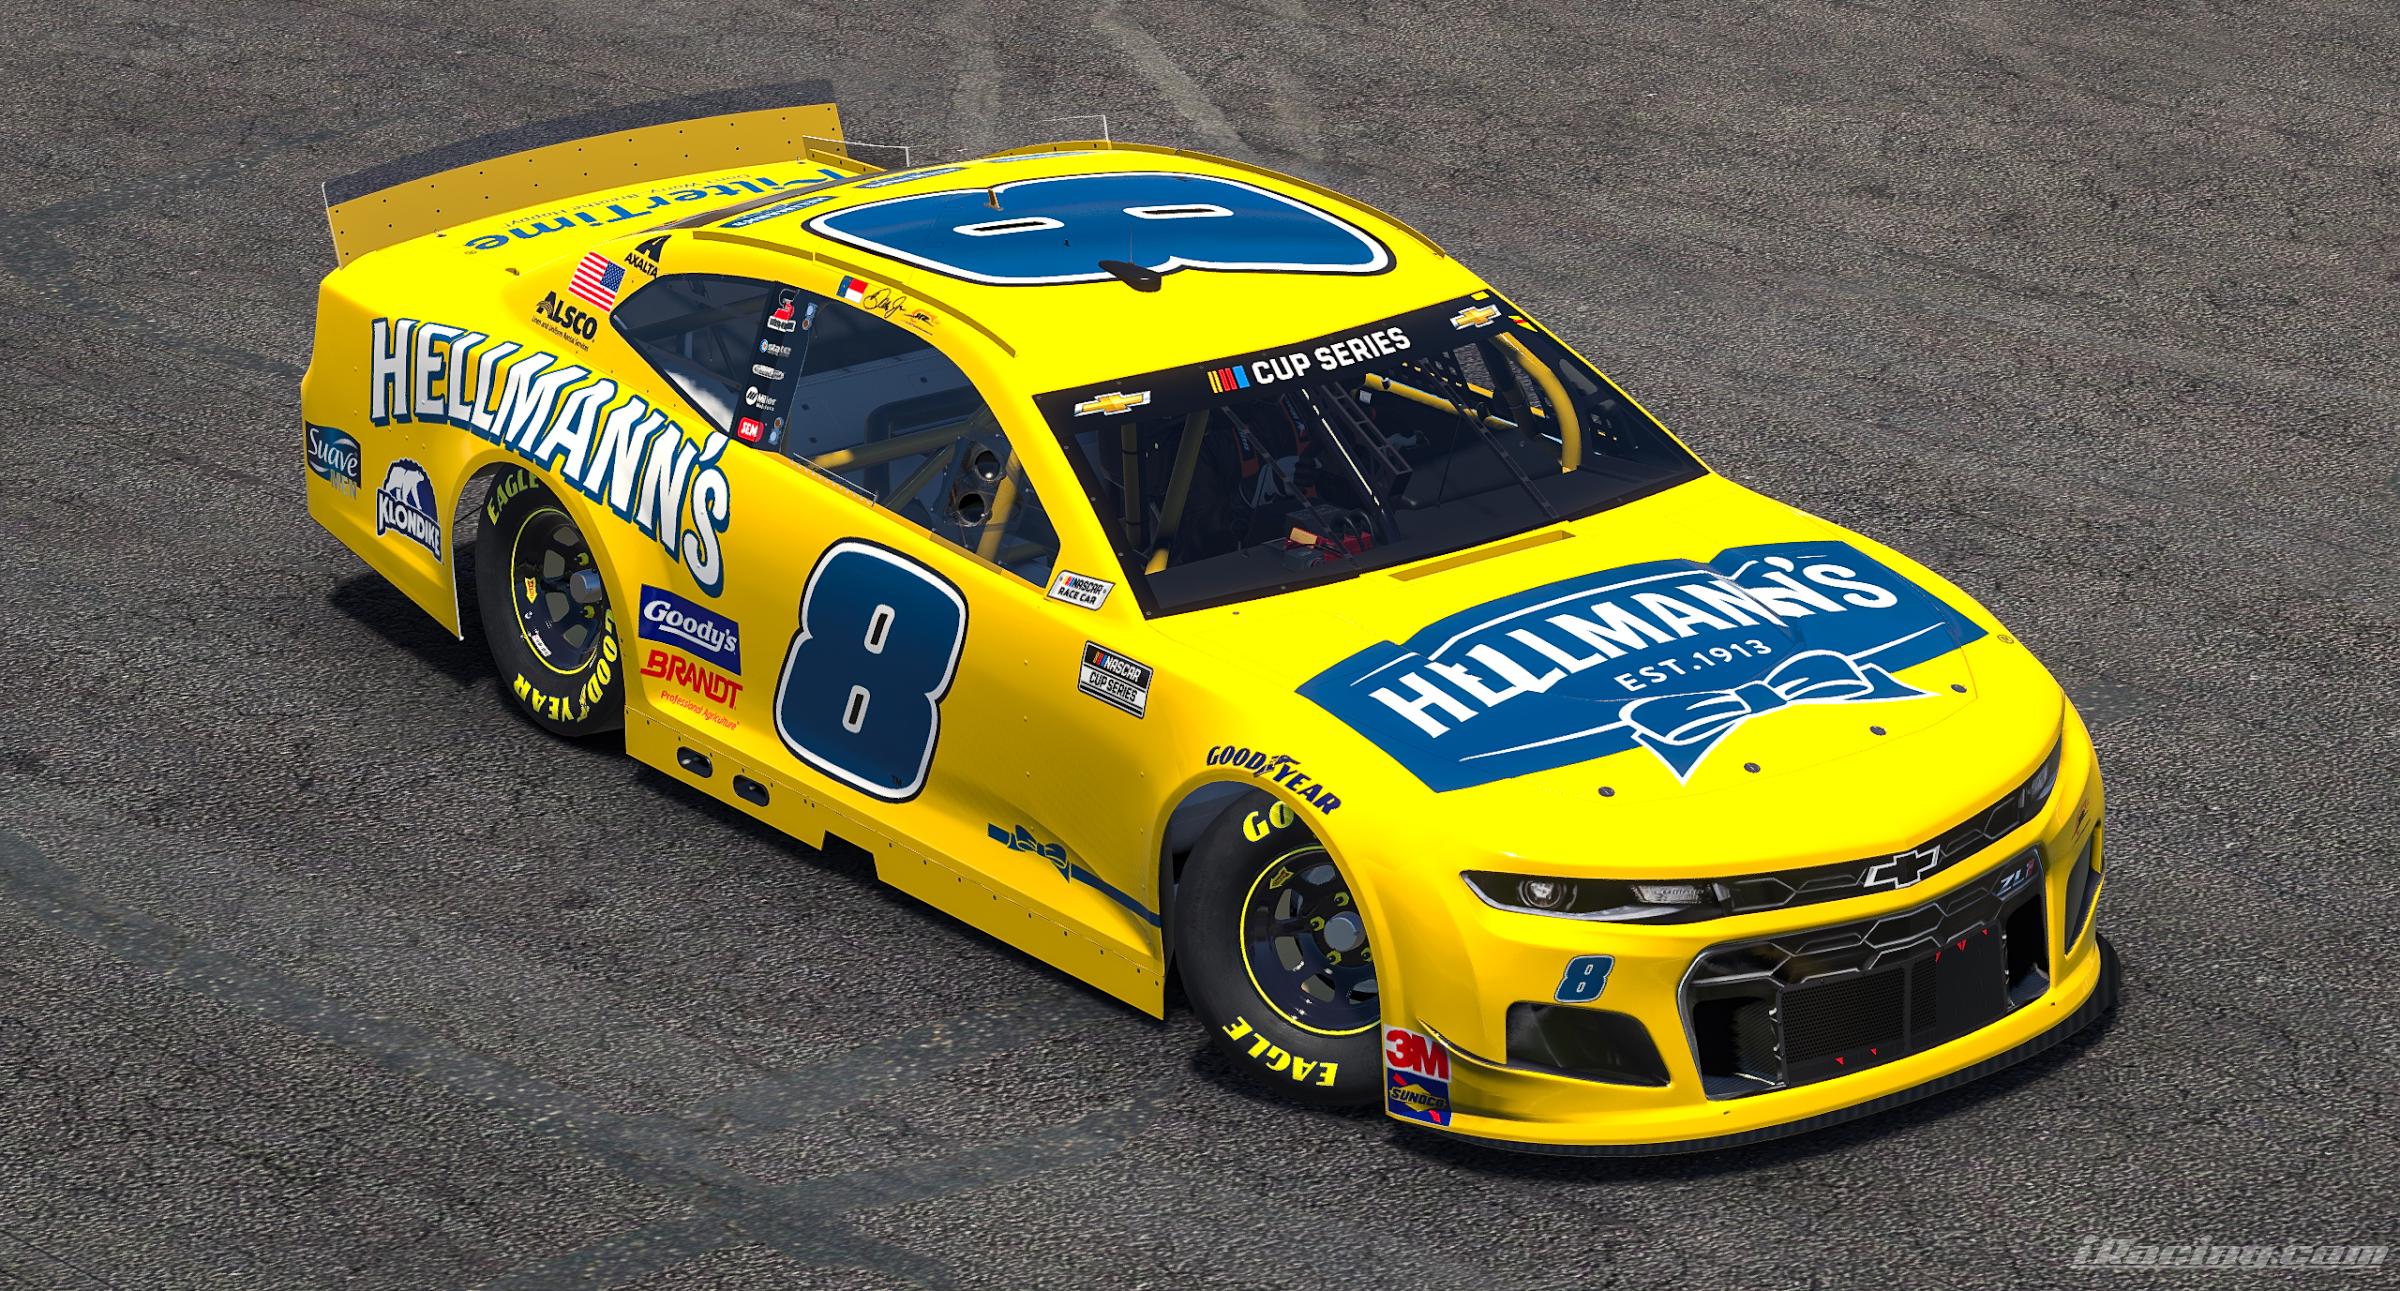 Preview of 2020 Dale Earnhardt Jr Hellmanns Camaro by Ryan A Williams